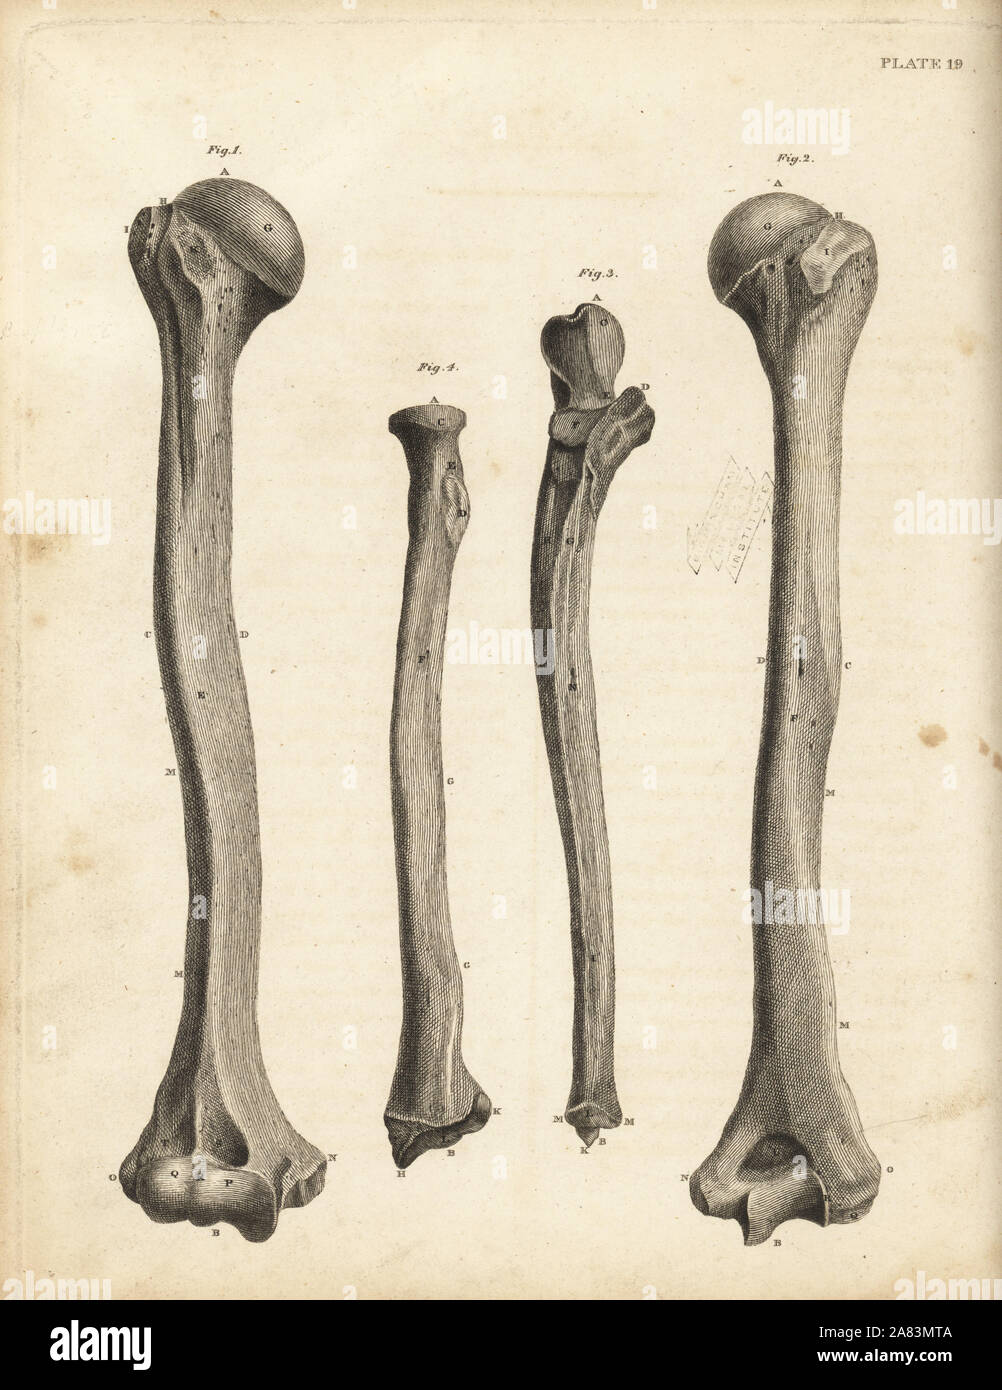 Views of the humerus and ulna bones in the human arm. Copperplate engraving by Edward Mitchell after an anatomical illustration from John Barclay's A Series of Engravings of the Human Skeleton, MacLachlan and Stewart, Edinburgh, 1824. Stock Photo